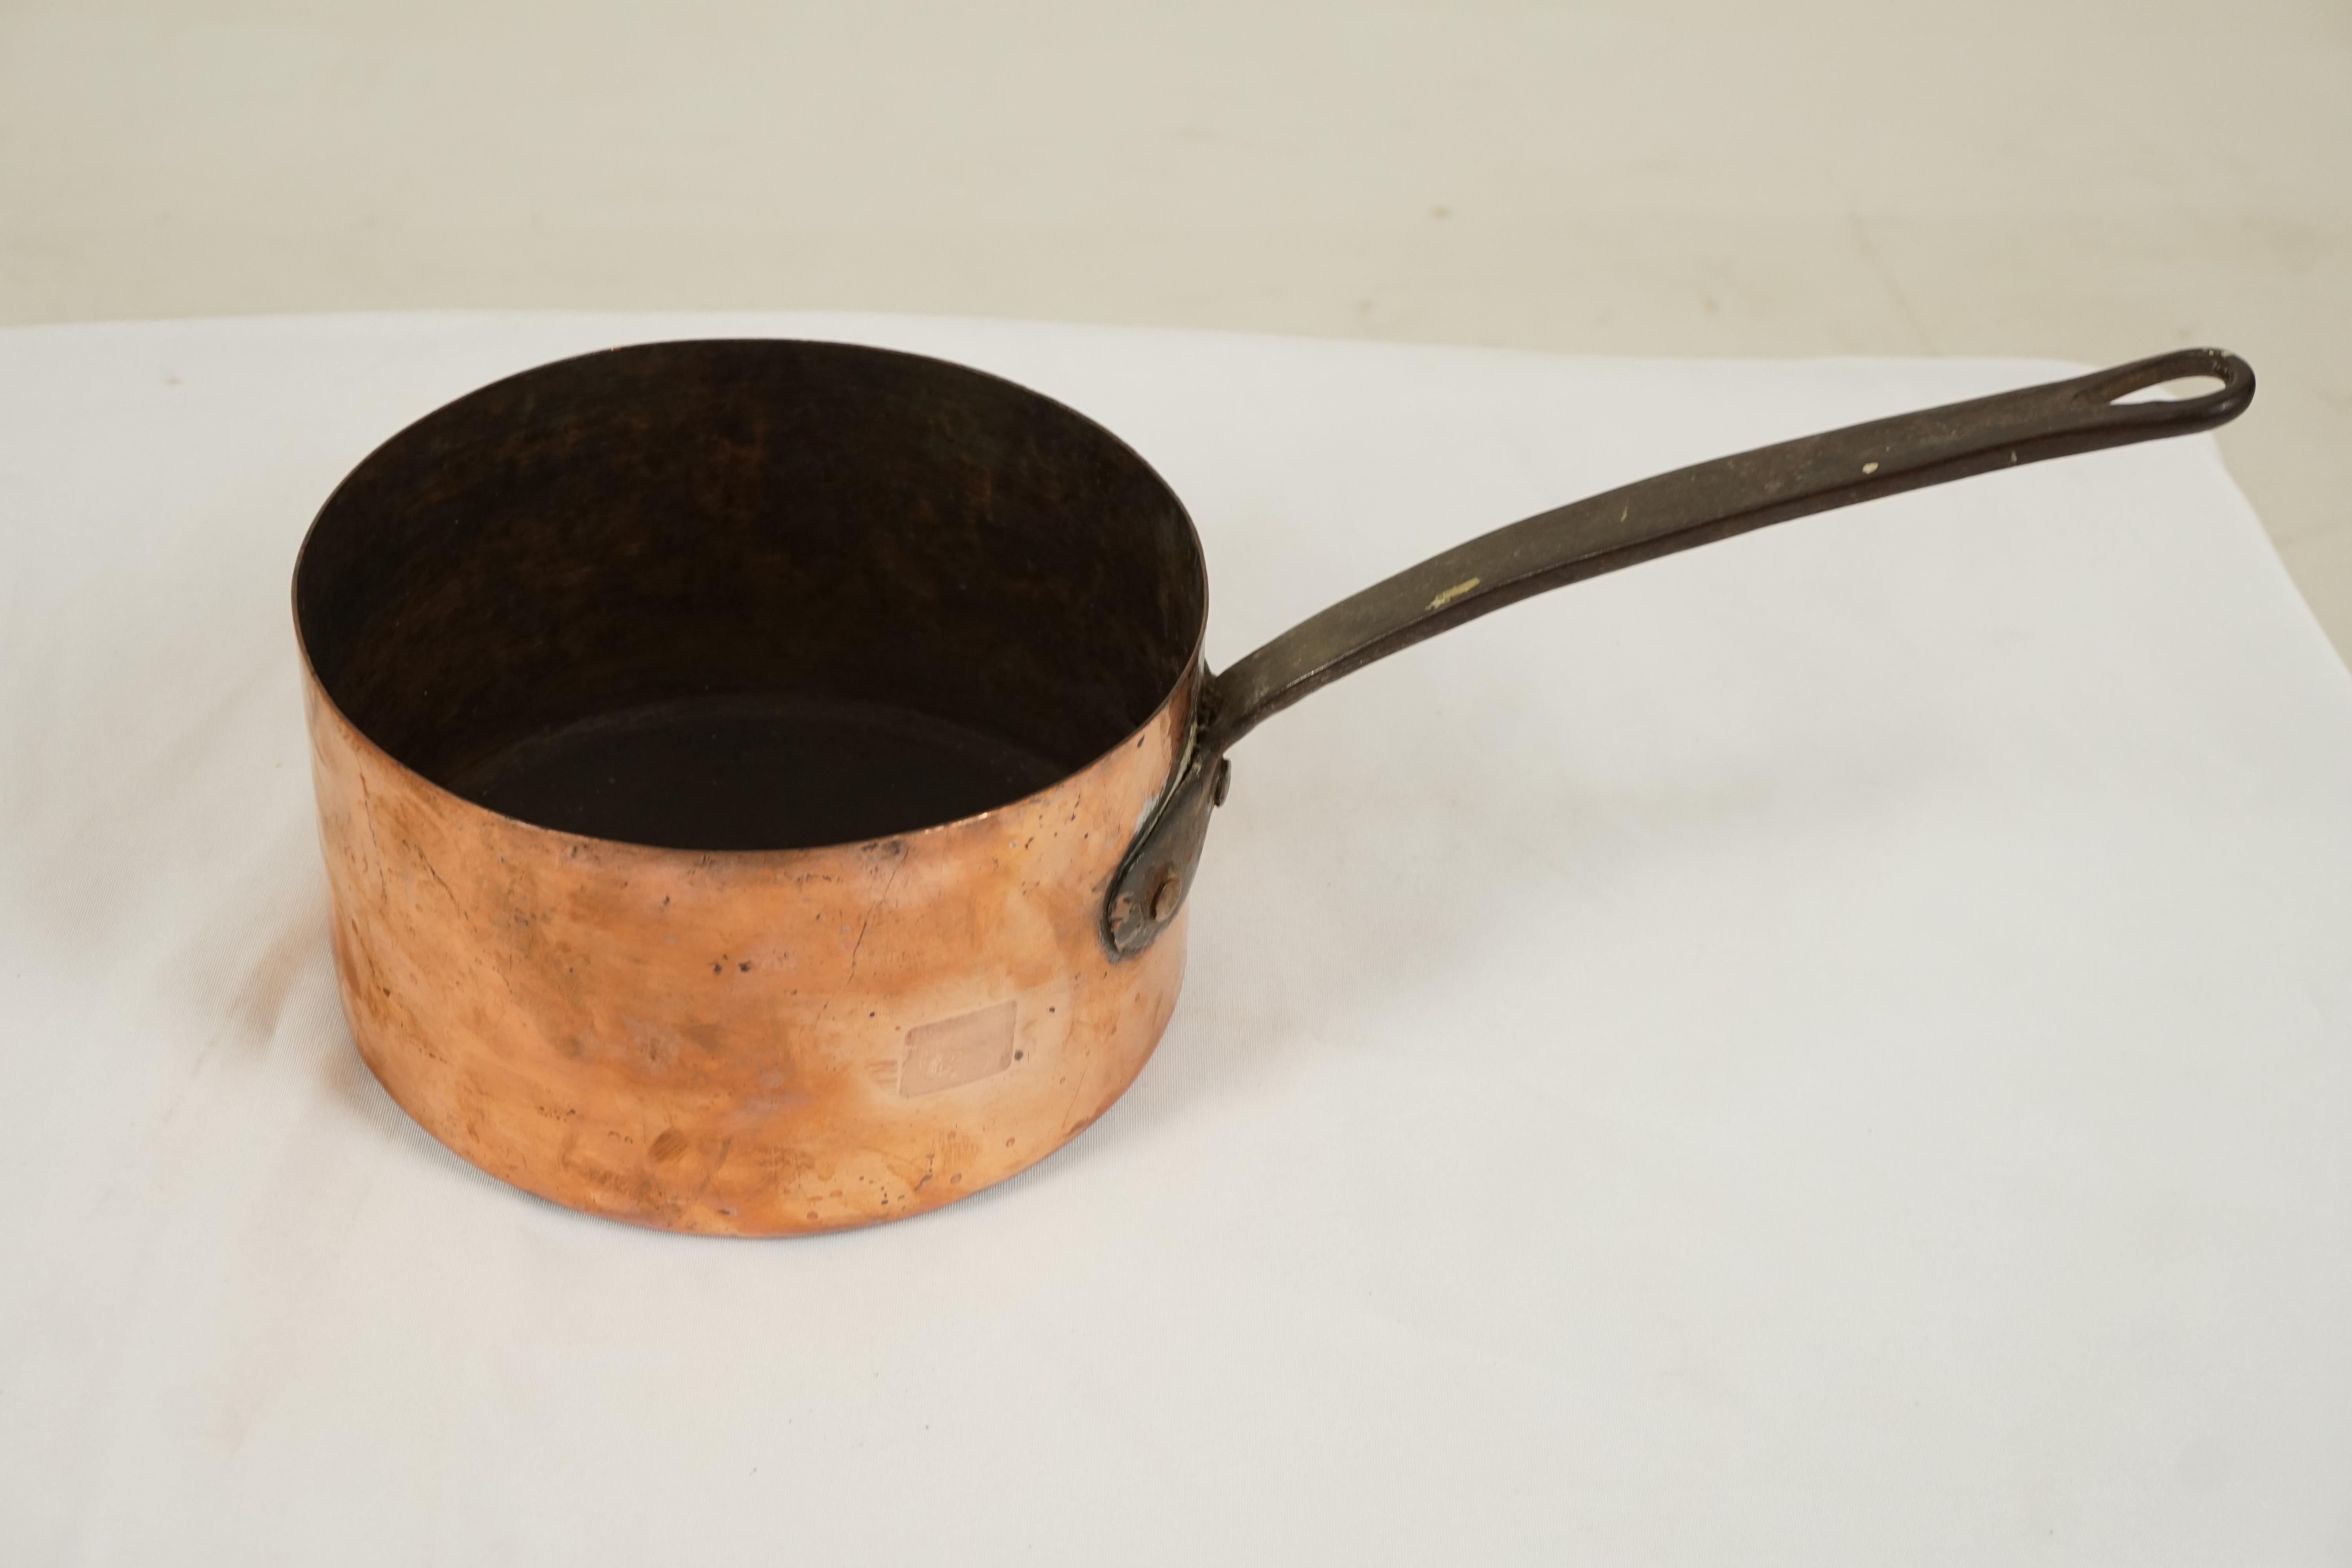 Antique Victorian saucepan, copper cooking pot with handle, Scotland 1890, B145y

Scotland 1890
Solid copper
Circular copper pot
With blacksmith made wrought iron handle
In good condition



Measures: 7.5